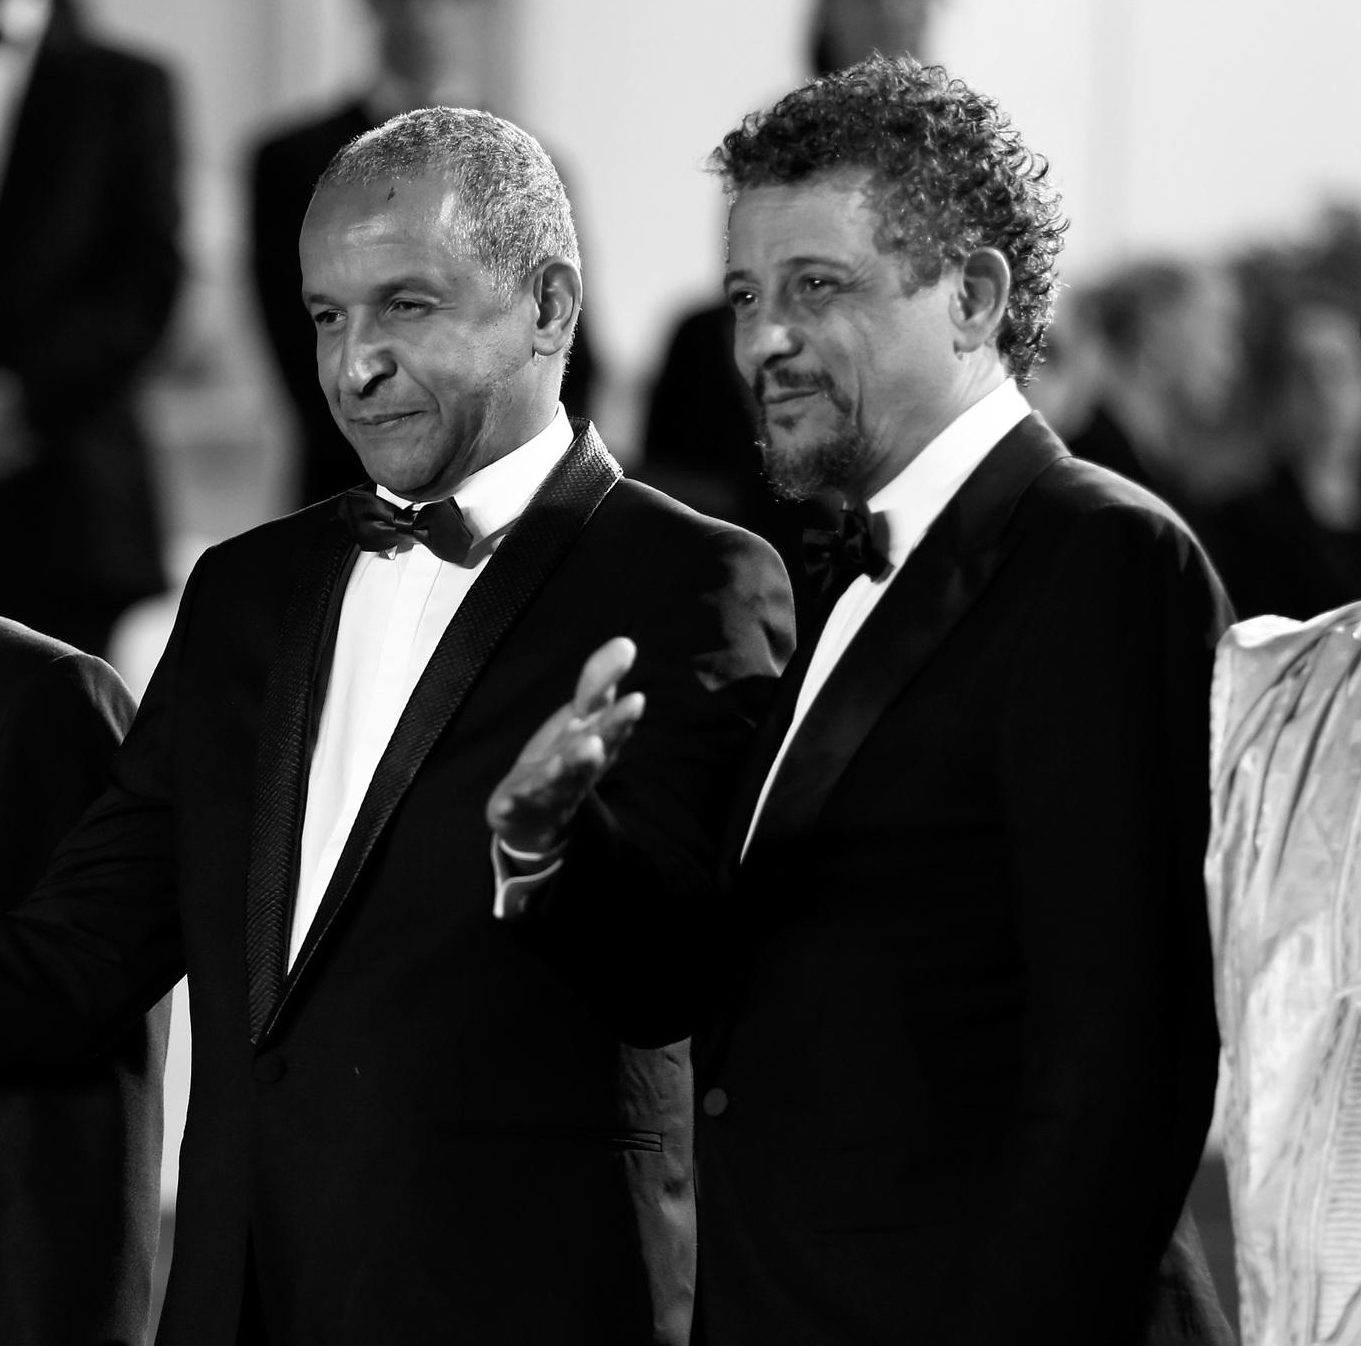 'Timbuktu' Premiere at the 67th Annual Cannes Film Festival